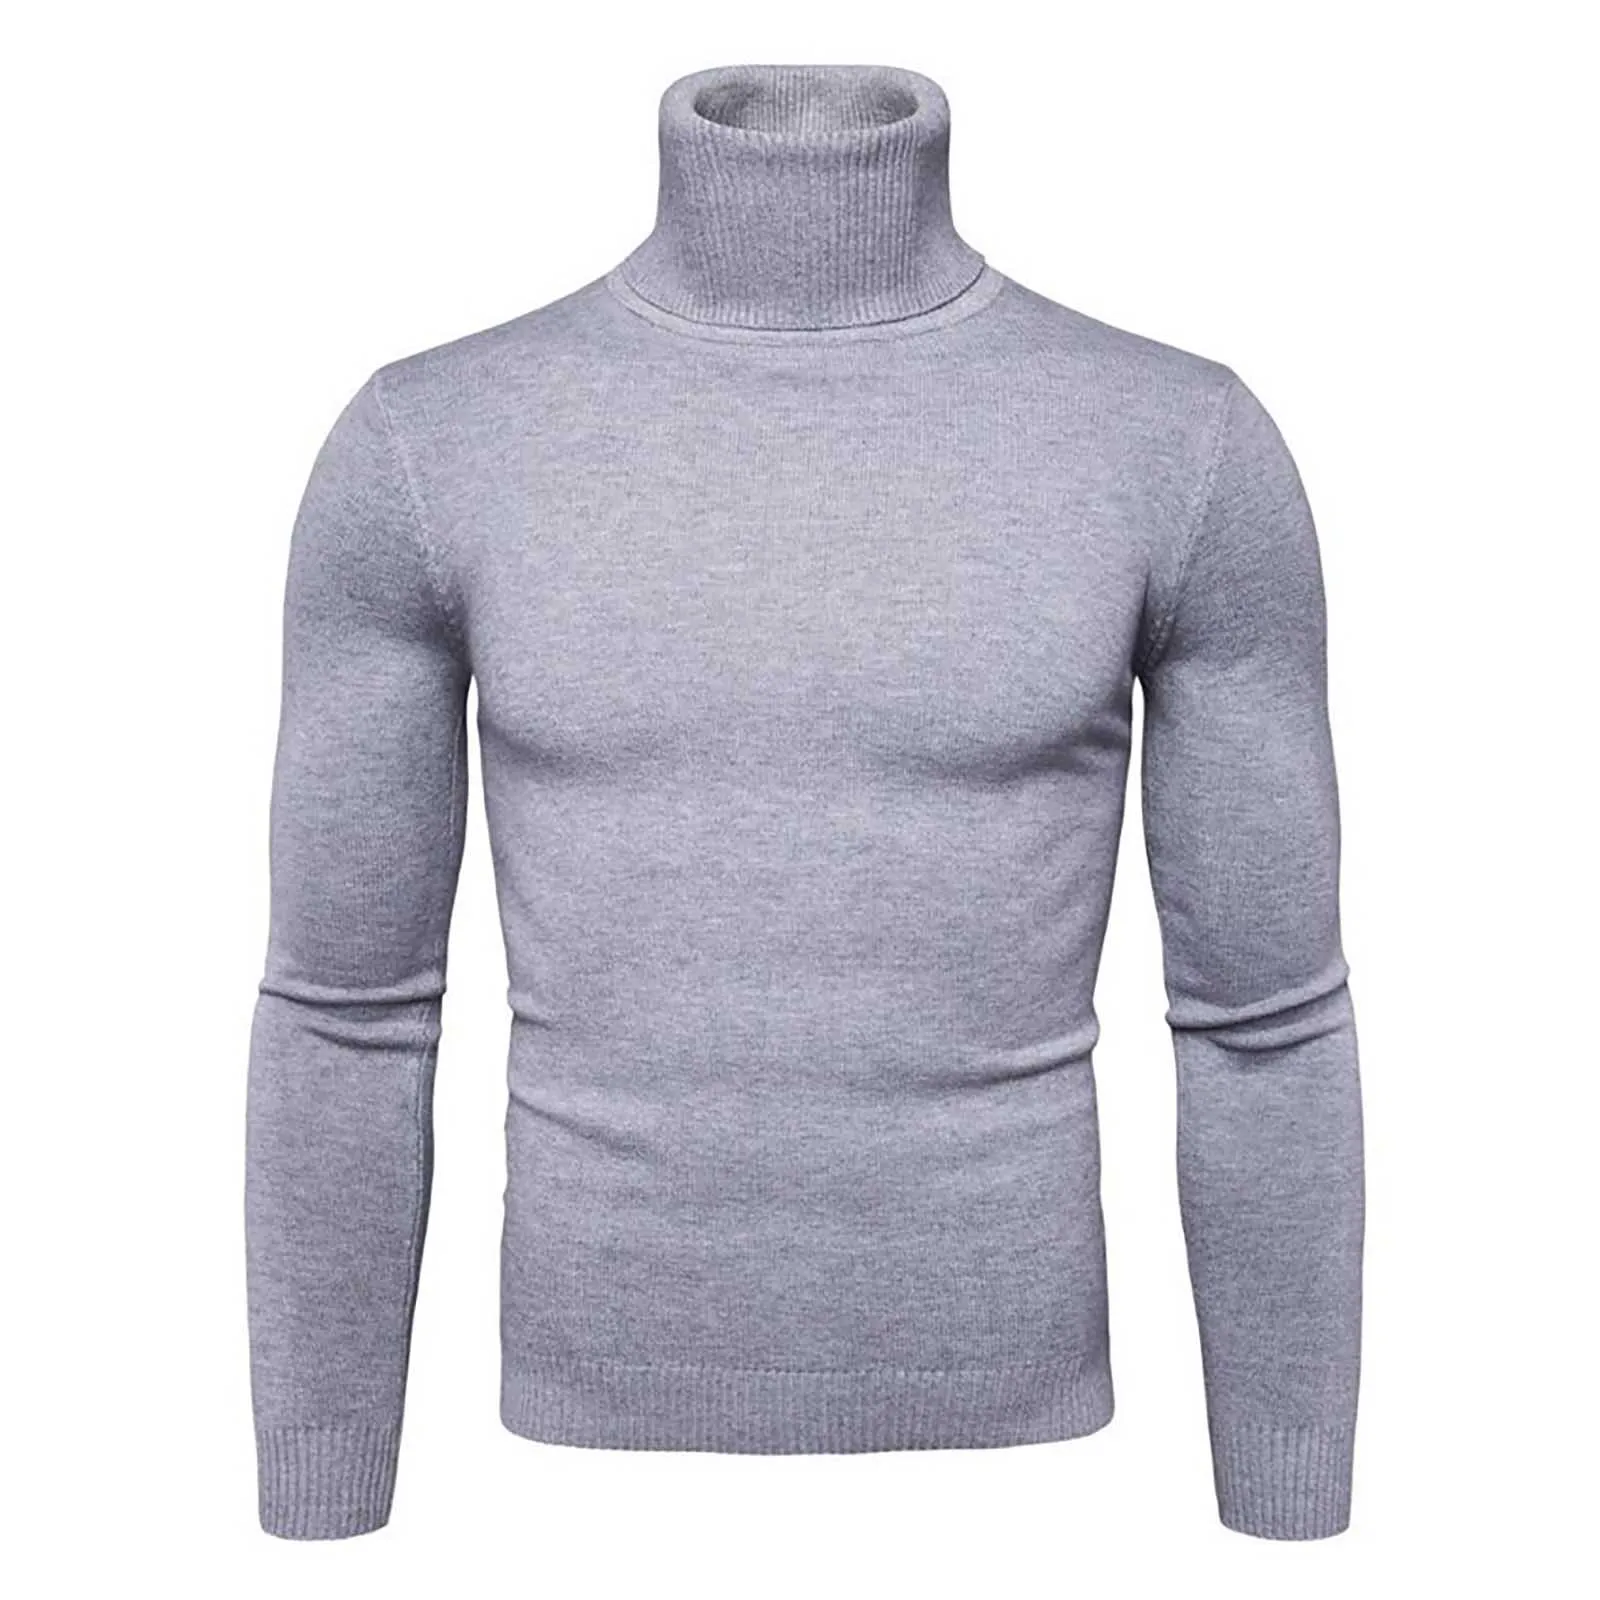 Mens Turtleneck Sweaters Red Wine Pullovers Sweater For Man Office Cotton Knitted Clothing Male Sweaters Pull Hombre Tops turtleneck sweater men Sweaters